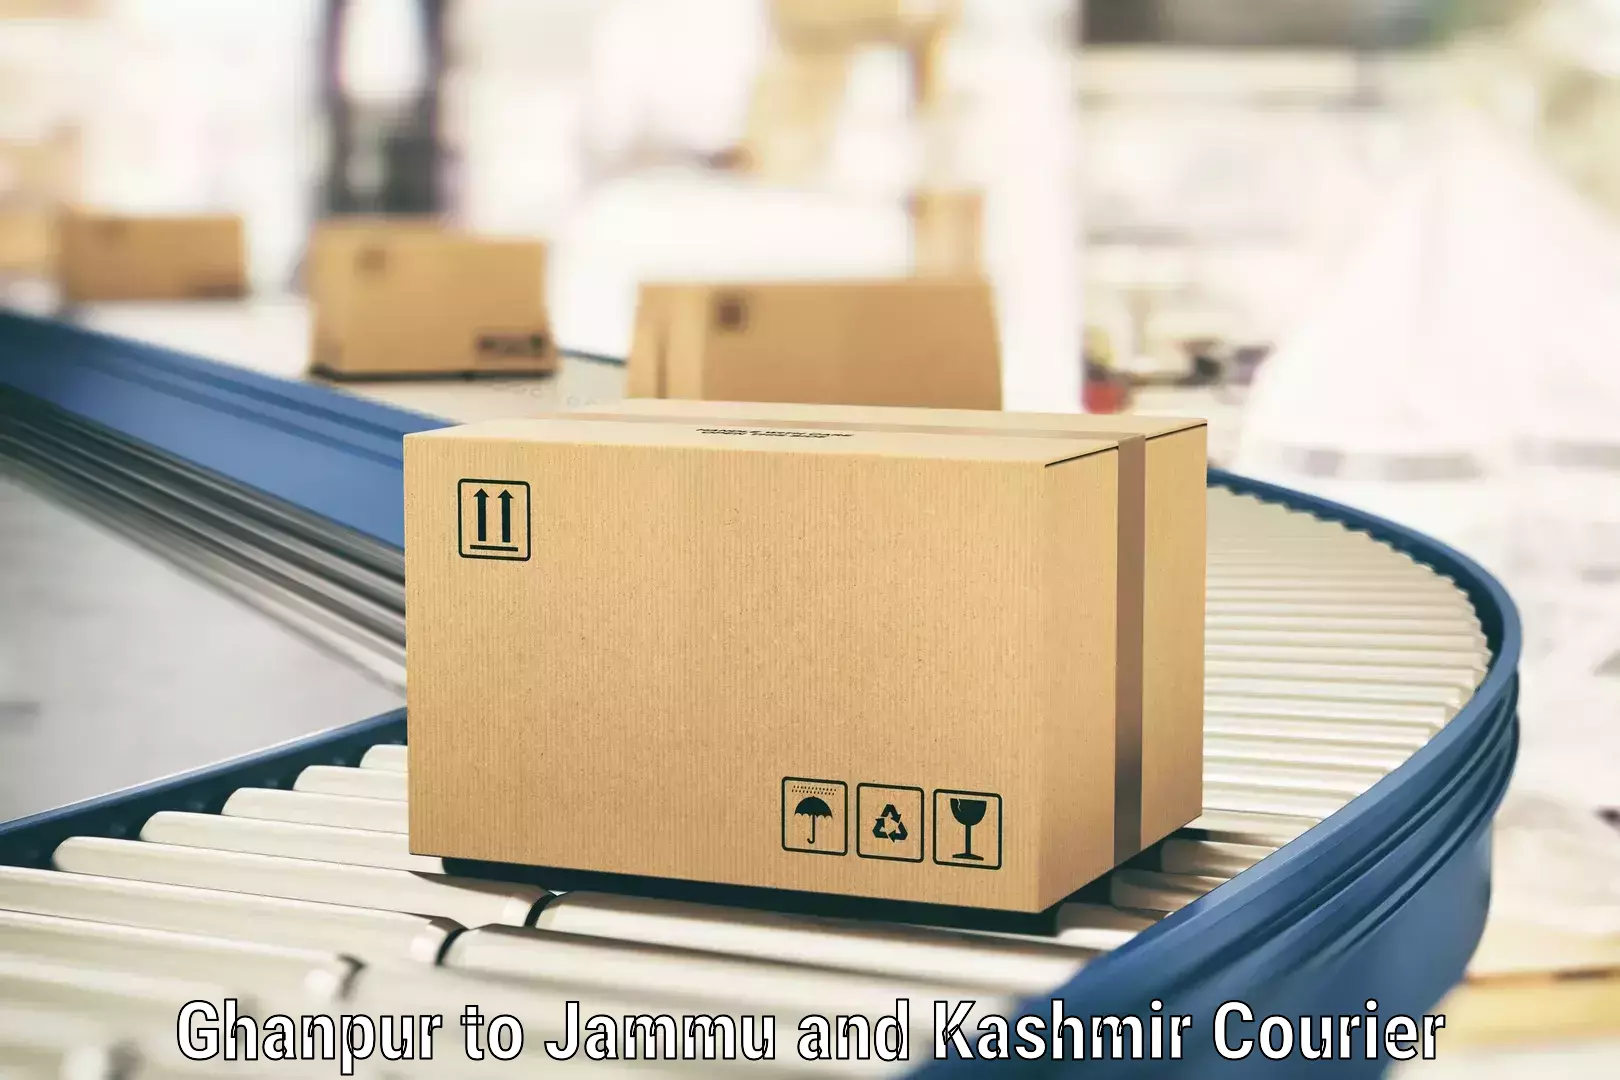 Advanced delivery network Ghanpur to Kupwara